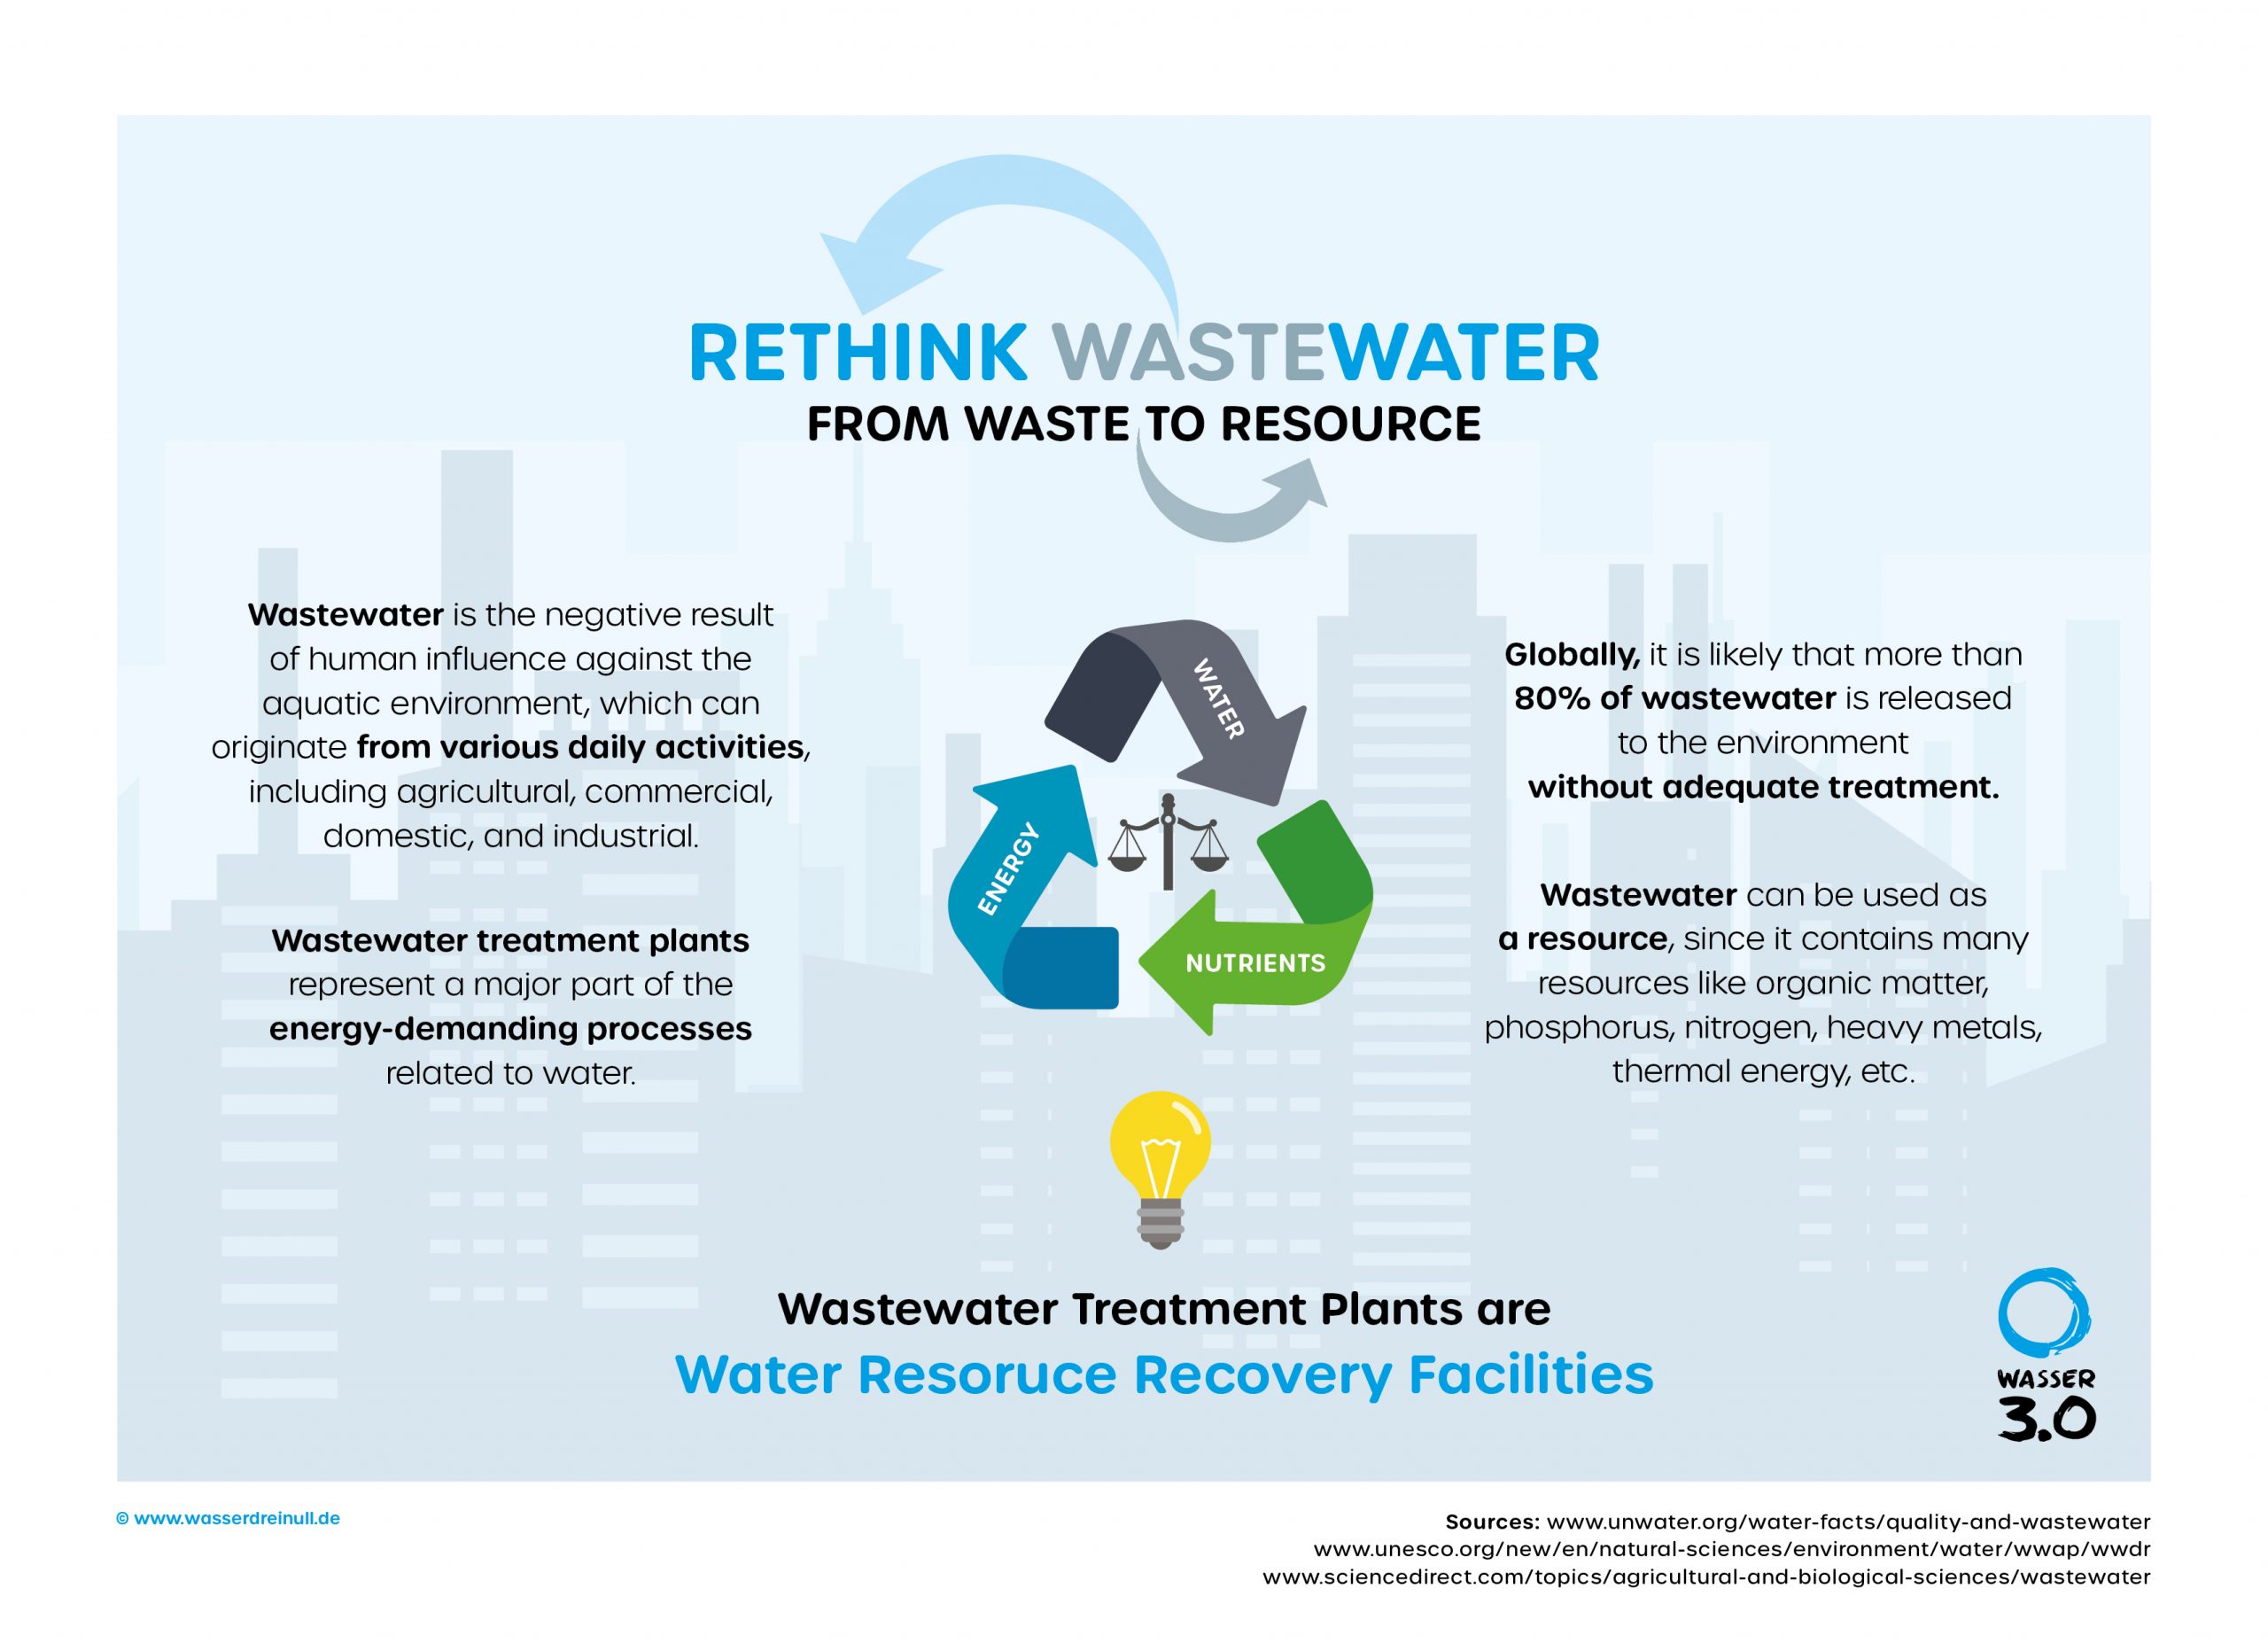 Wastewater as a resource